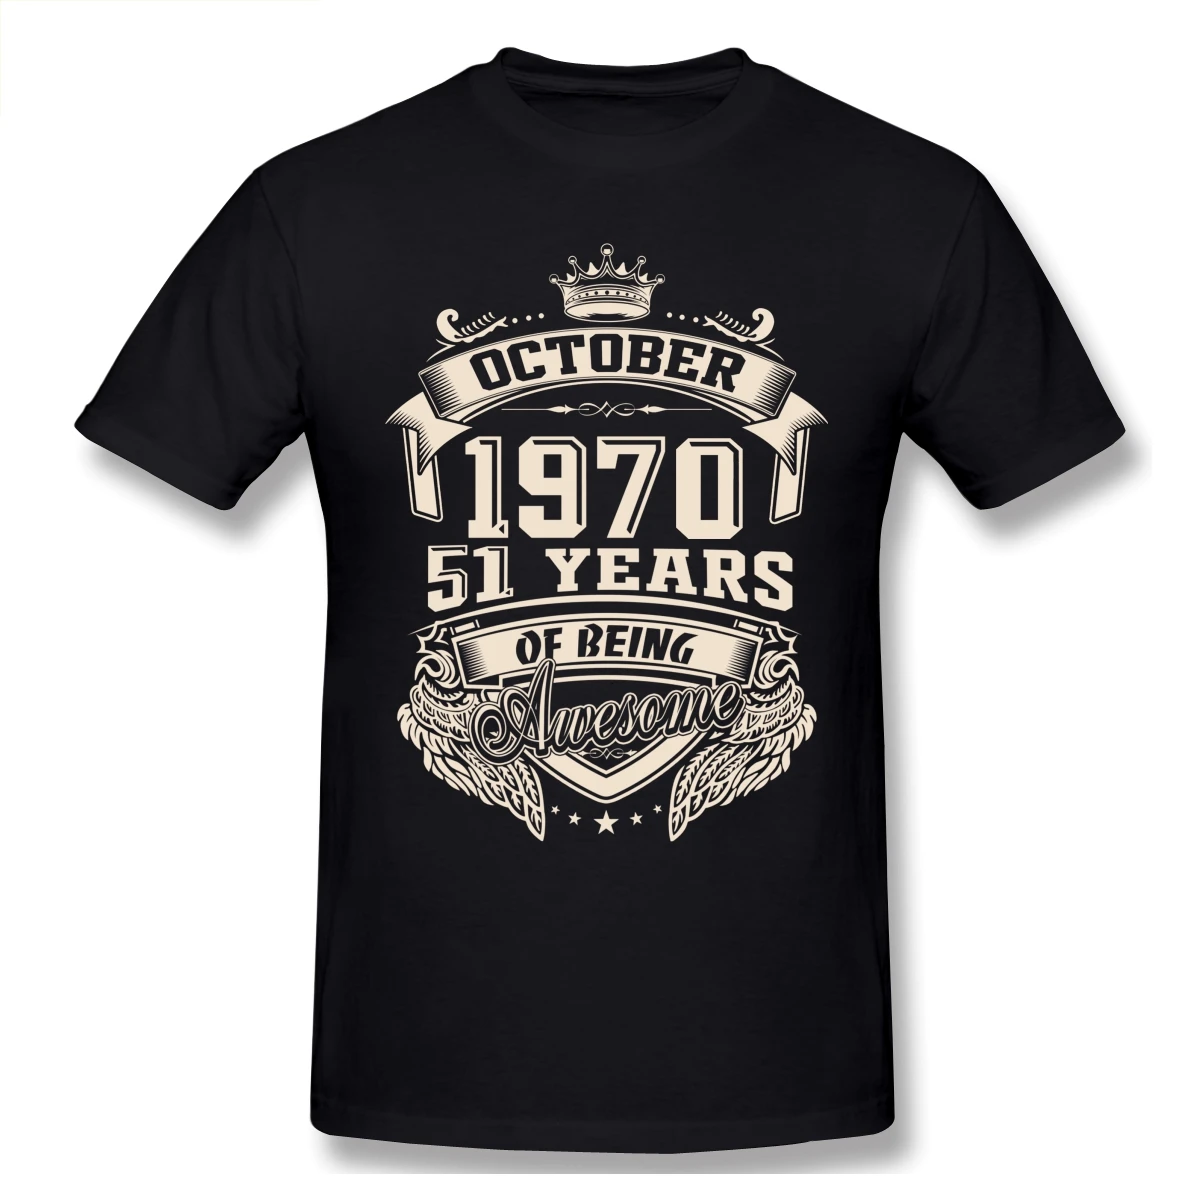 

Born In October 1970 51 Years Of Being Awesome T Shirt Oversized O-neck Cotton Custom Short Sleeve Tshirt Men